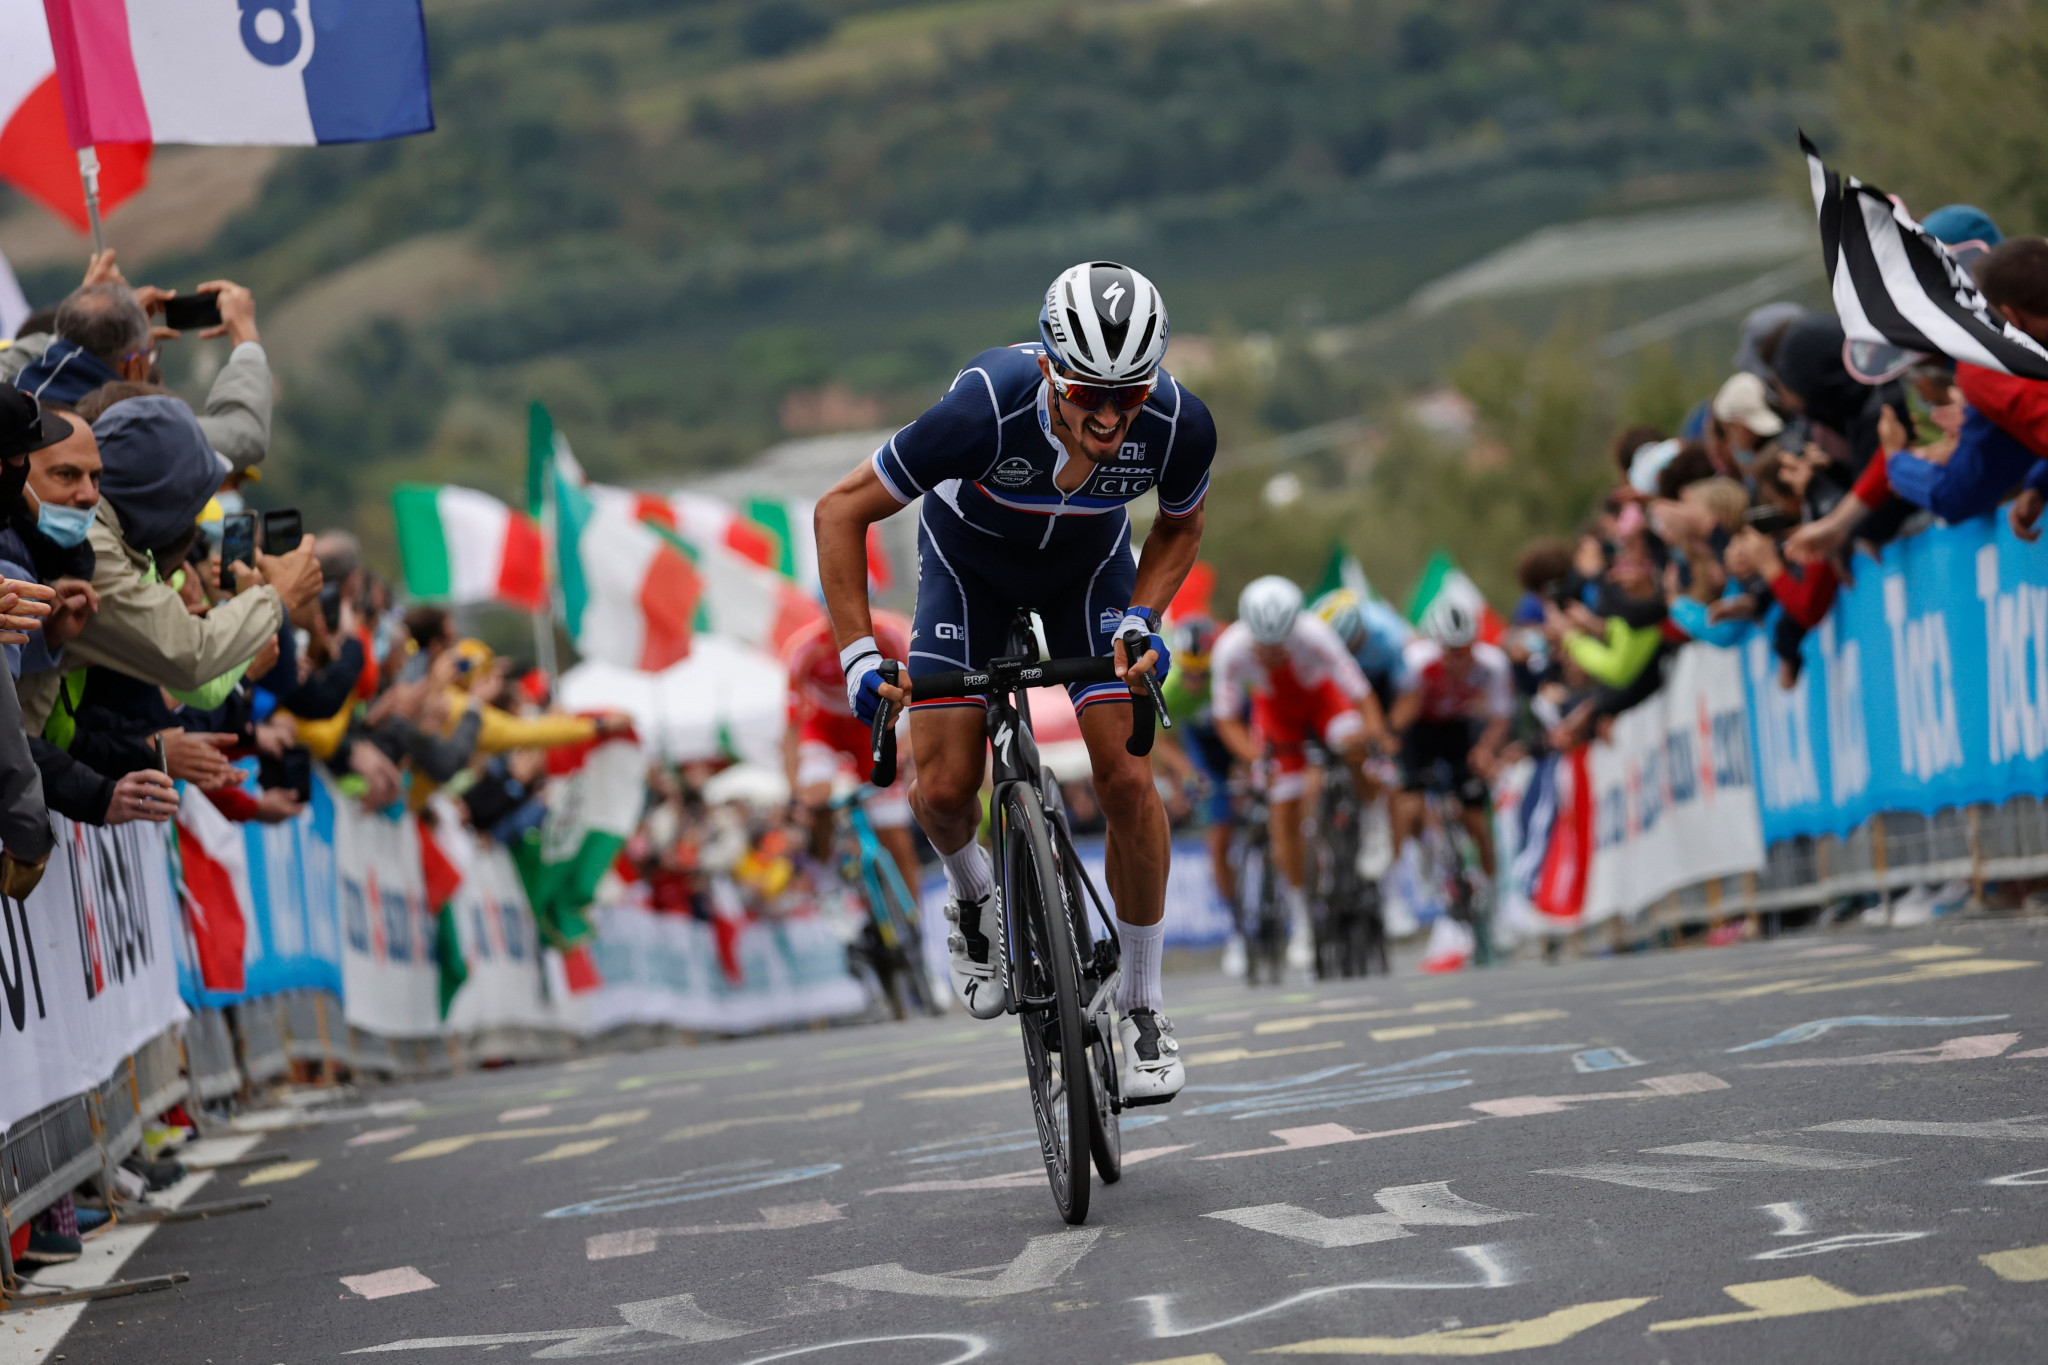 Julian Alaphilippe attacked on the final climb en route to victory ©Getty Images